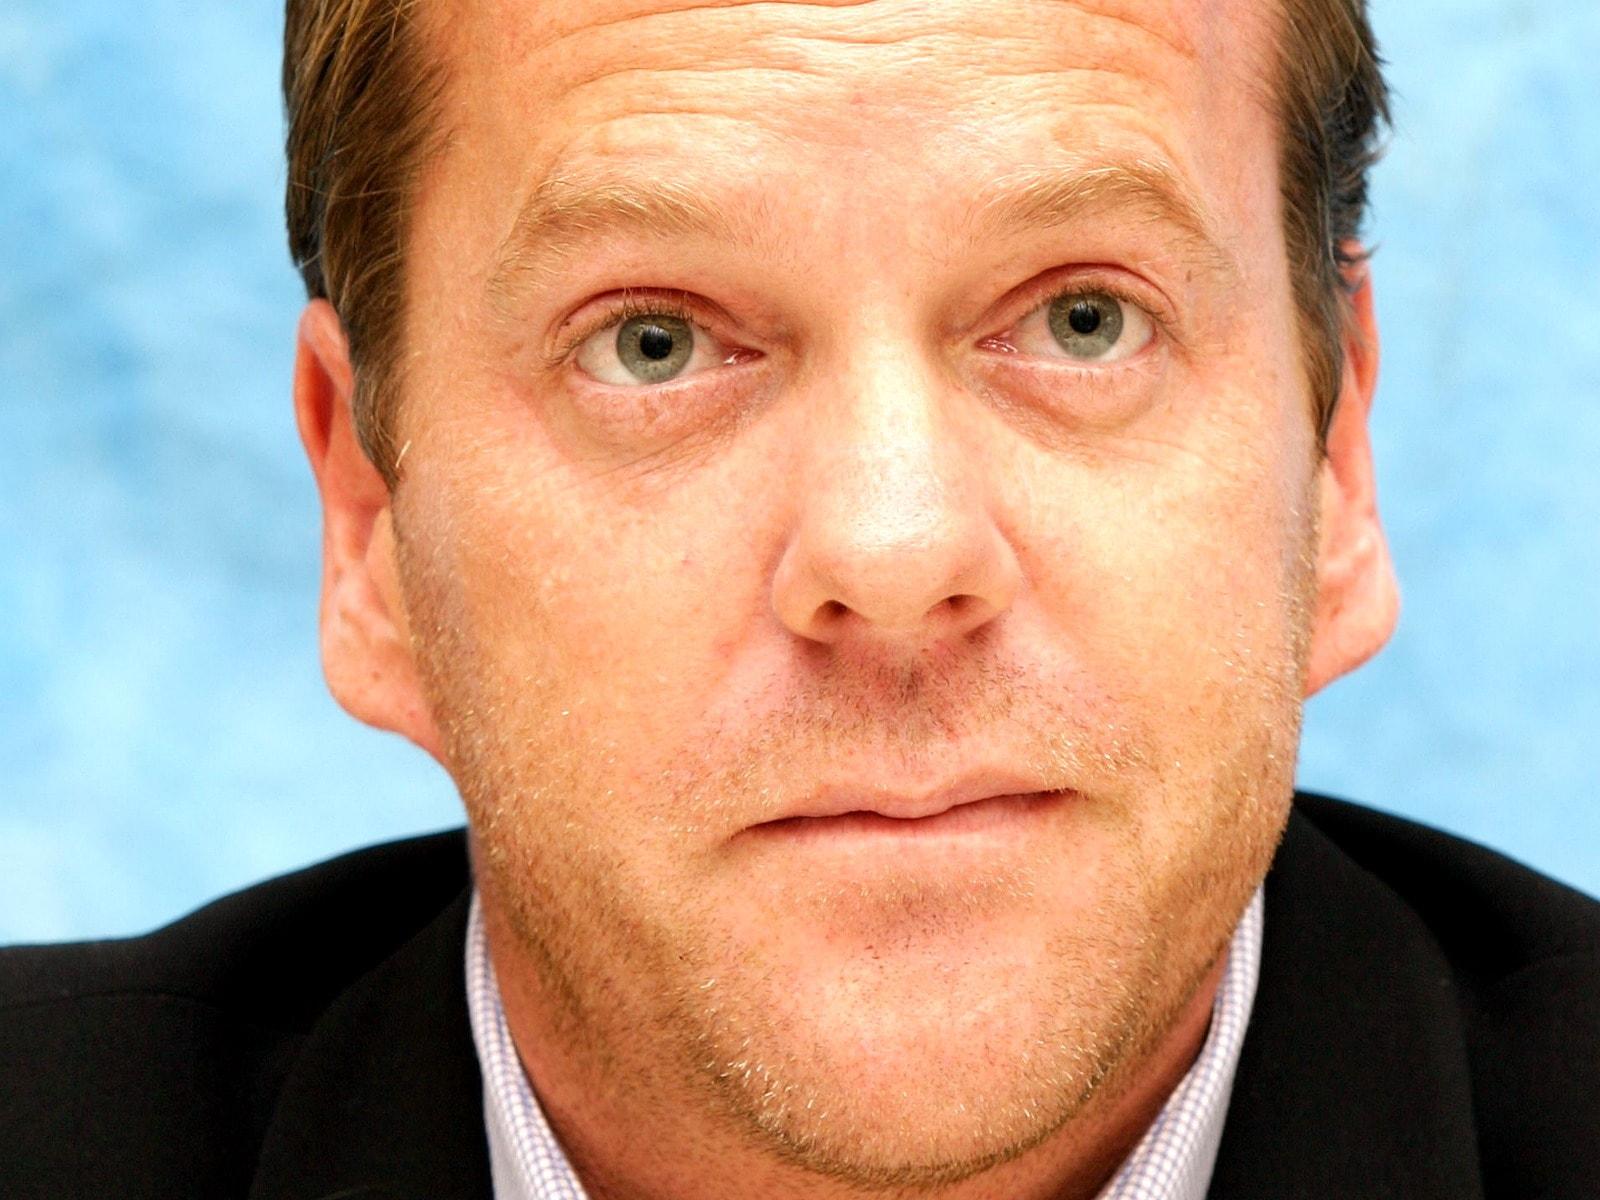 Kiefer Sutherland Face Wallpaper 59444 1600x1200px